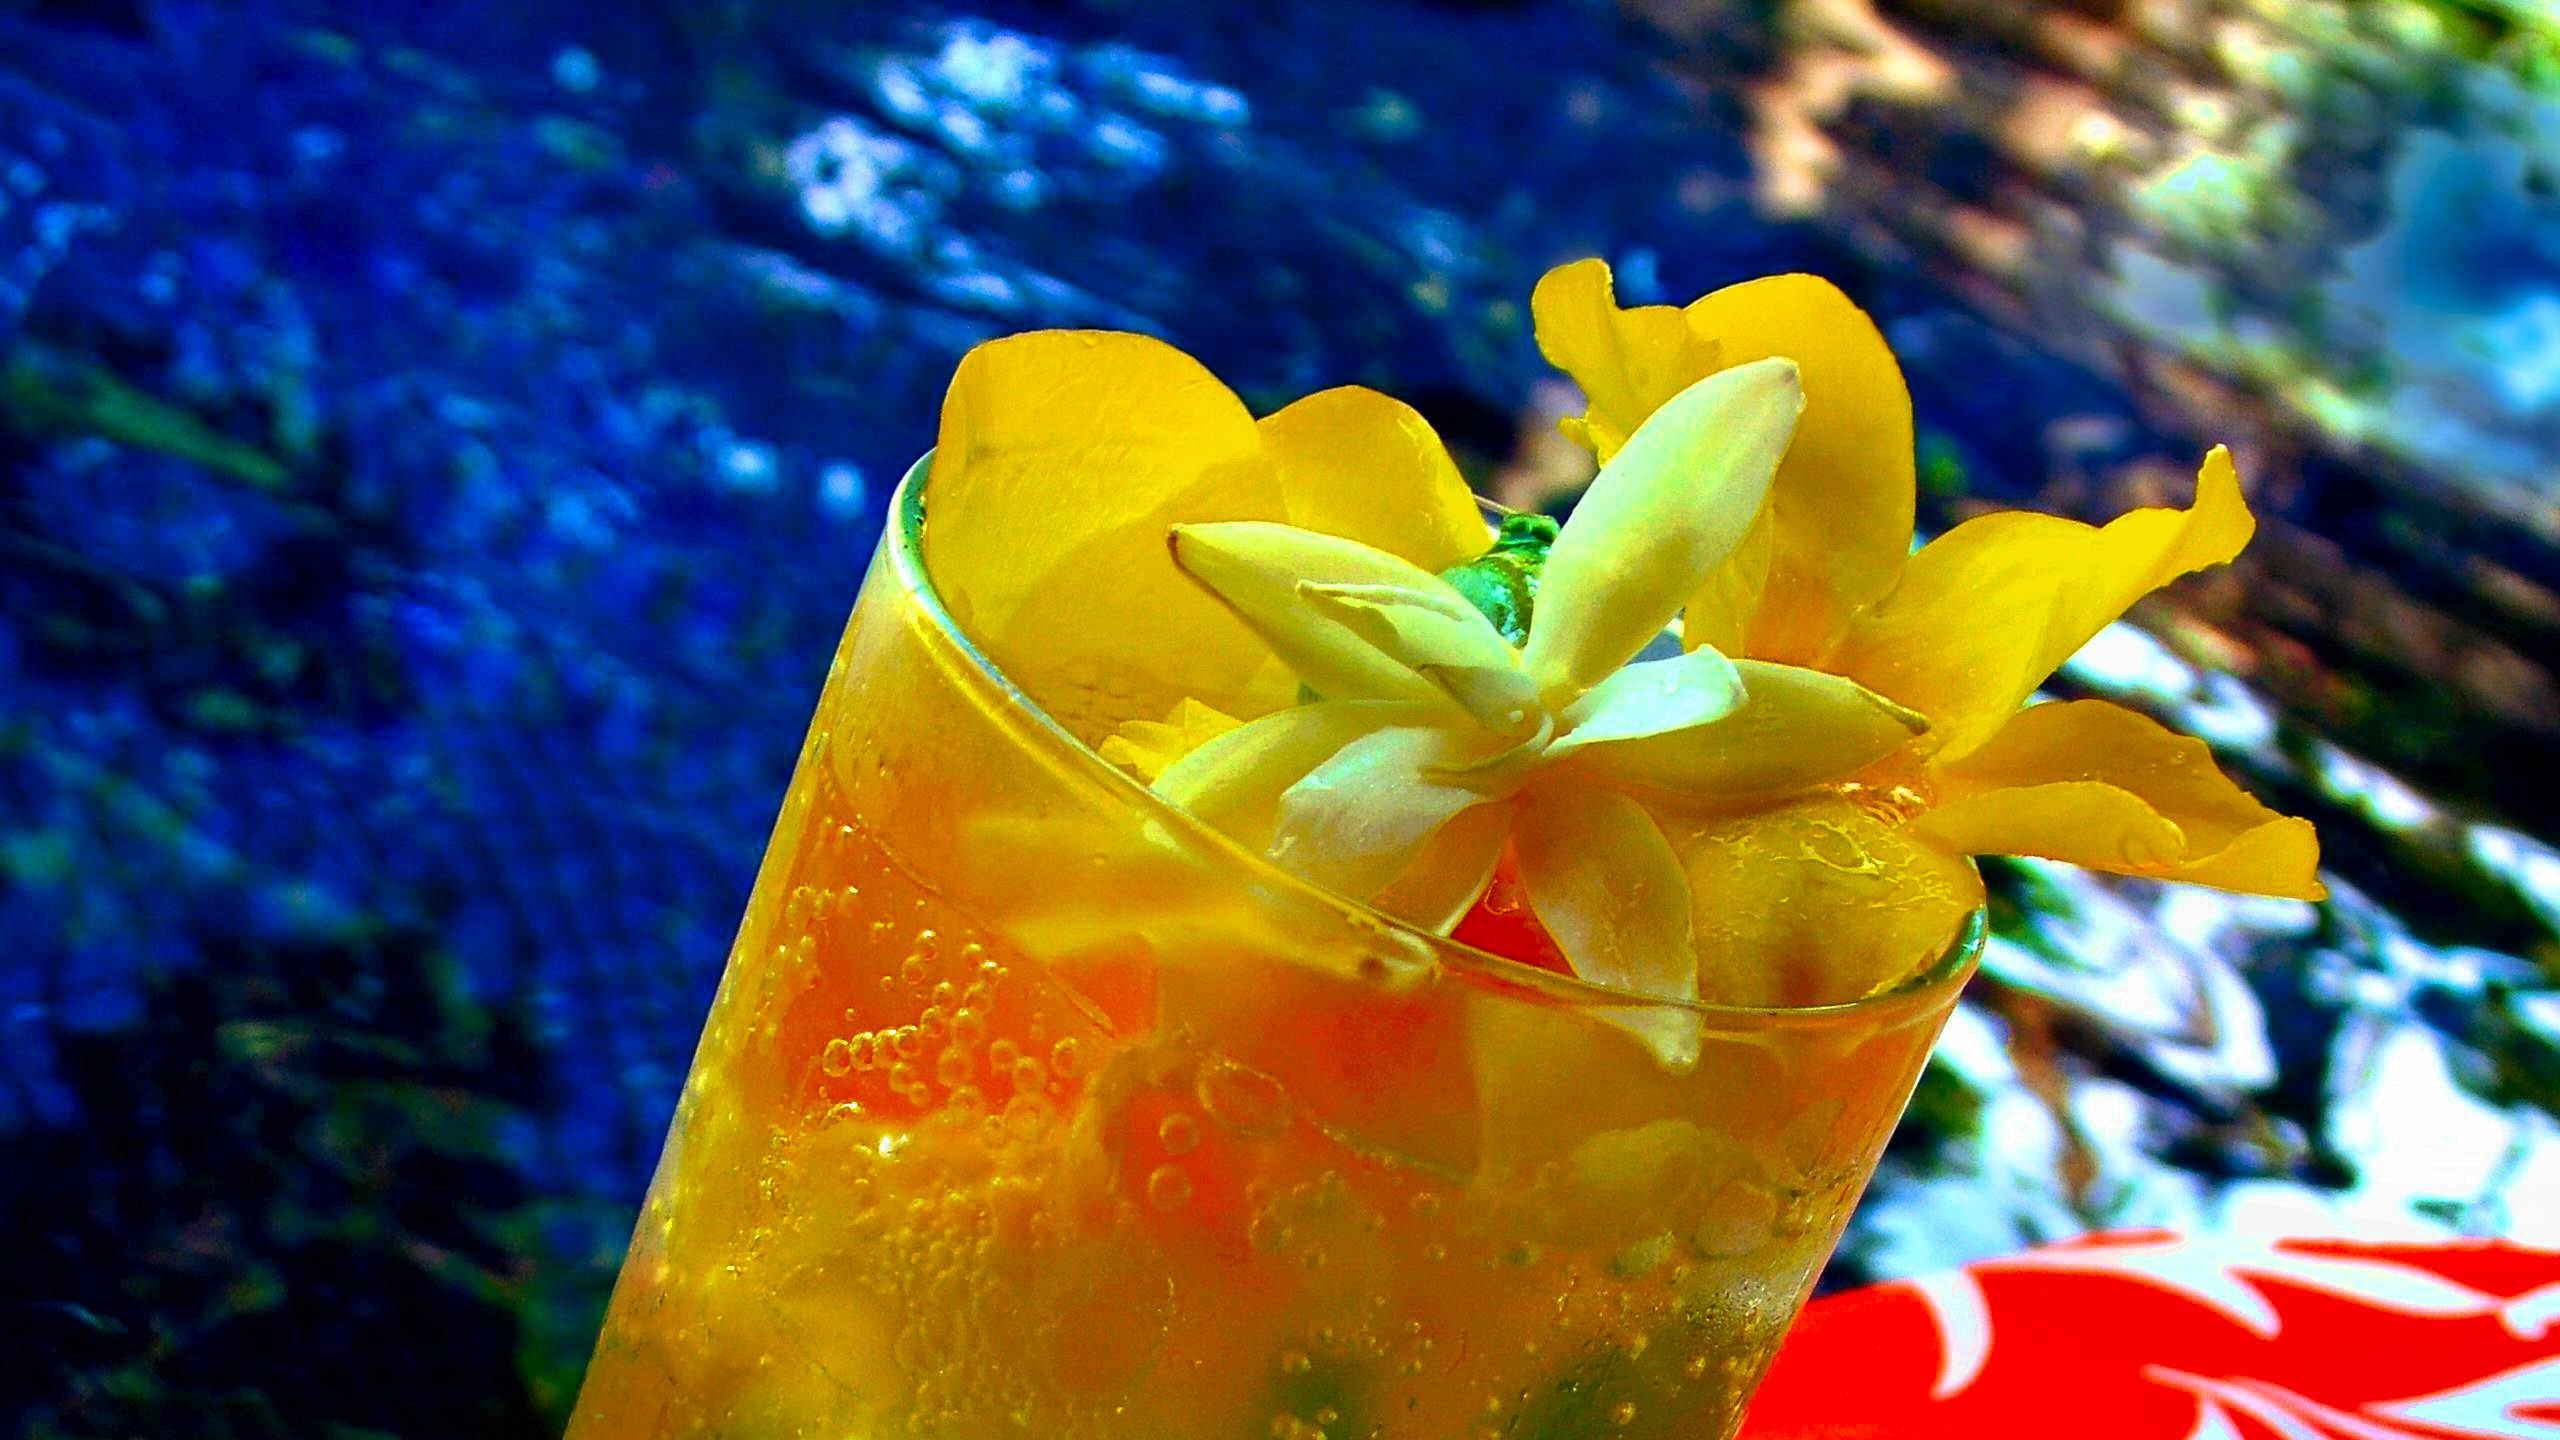 Clear Drinking Glass With Orange Juice. Wallpaper in 2560x1440 Resolution